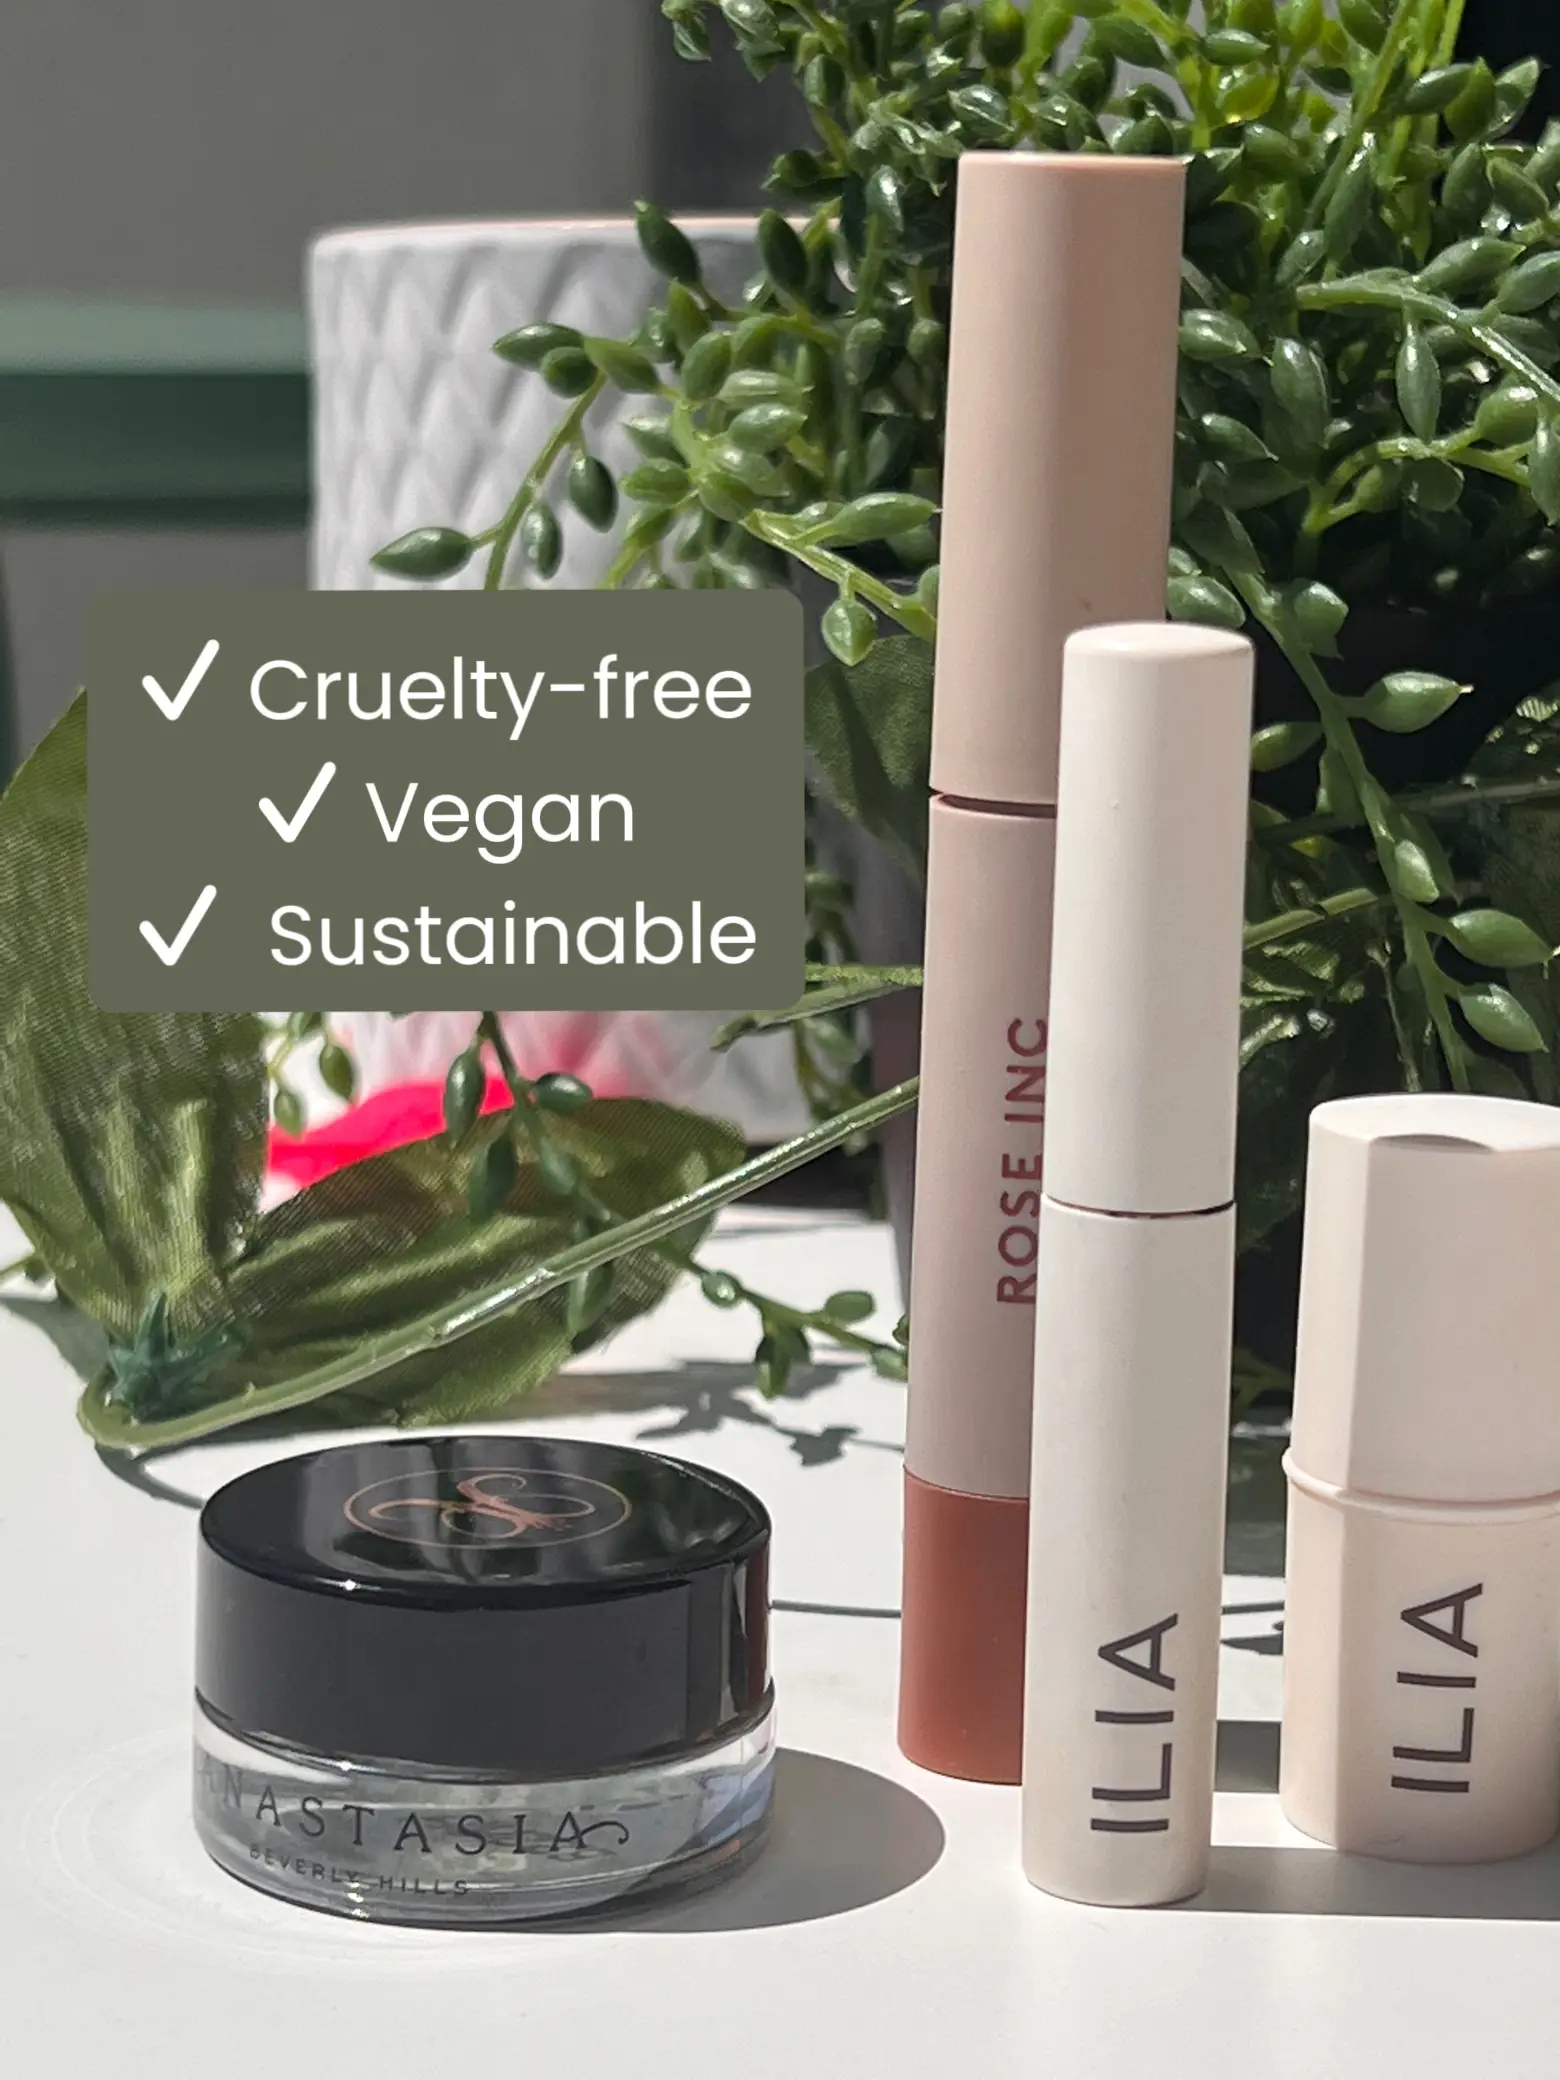 Clean Beauty 101: Why Non-Toxic Ingredients in Ilia Beauty Products Matter